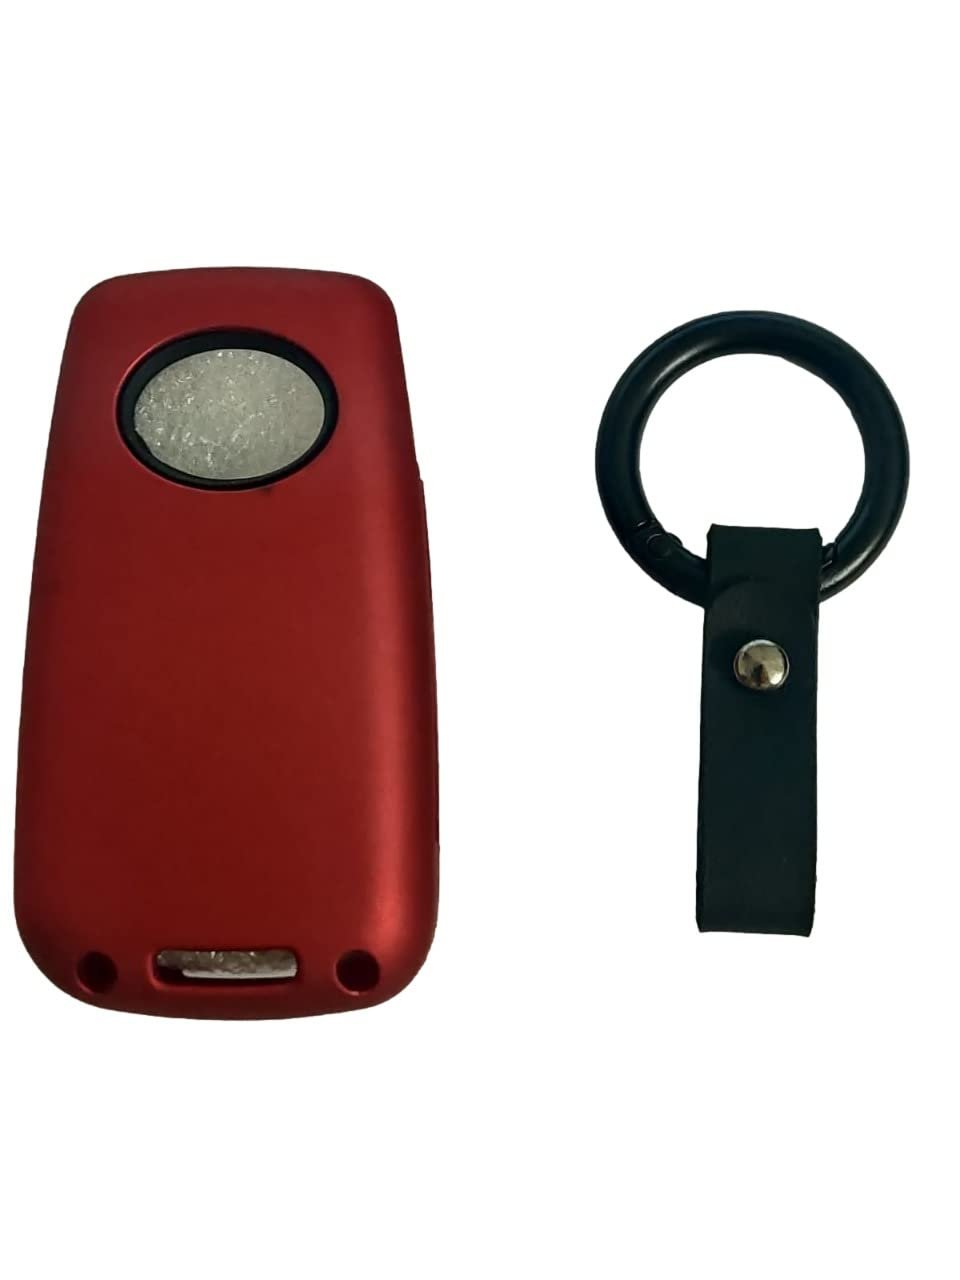 Red Fiber Style Car Key Cover Compatible with Toyota Corolla Altis Innova Crysta 3 Button Flip Key Cover (Red) Image 